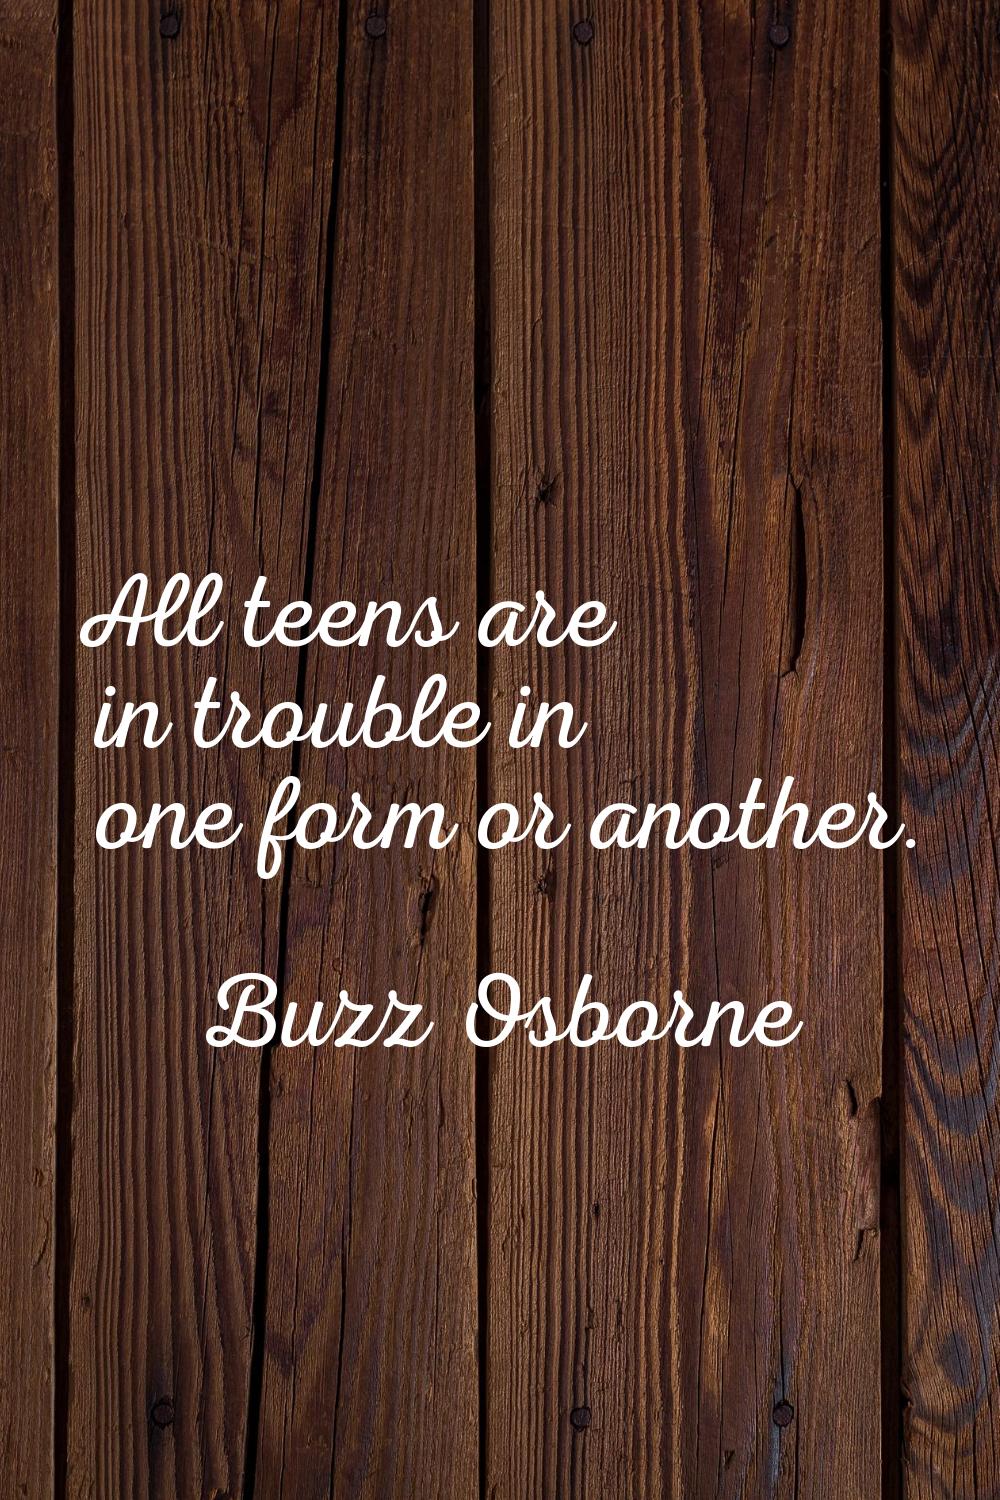 All teens are in trouble in one form or another.